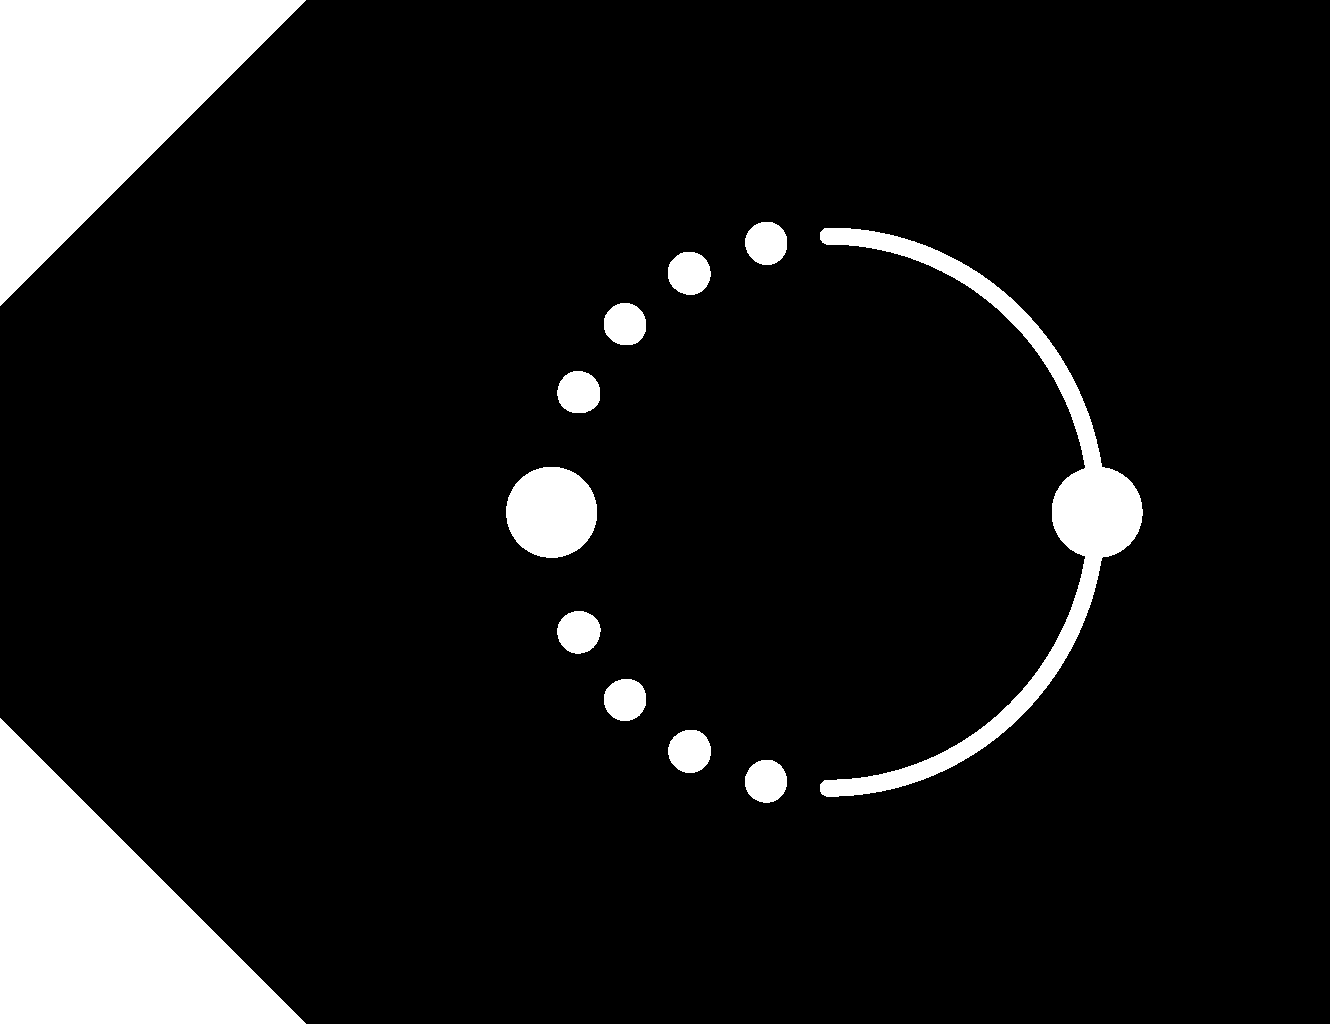 TK Creative Label icon. Black tag shape with a white circle made up of eight small dots on one half, a solid line on the other half, and each half bifurcated with two bigger dots.